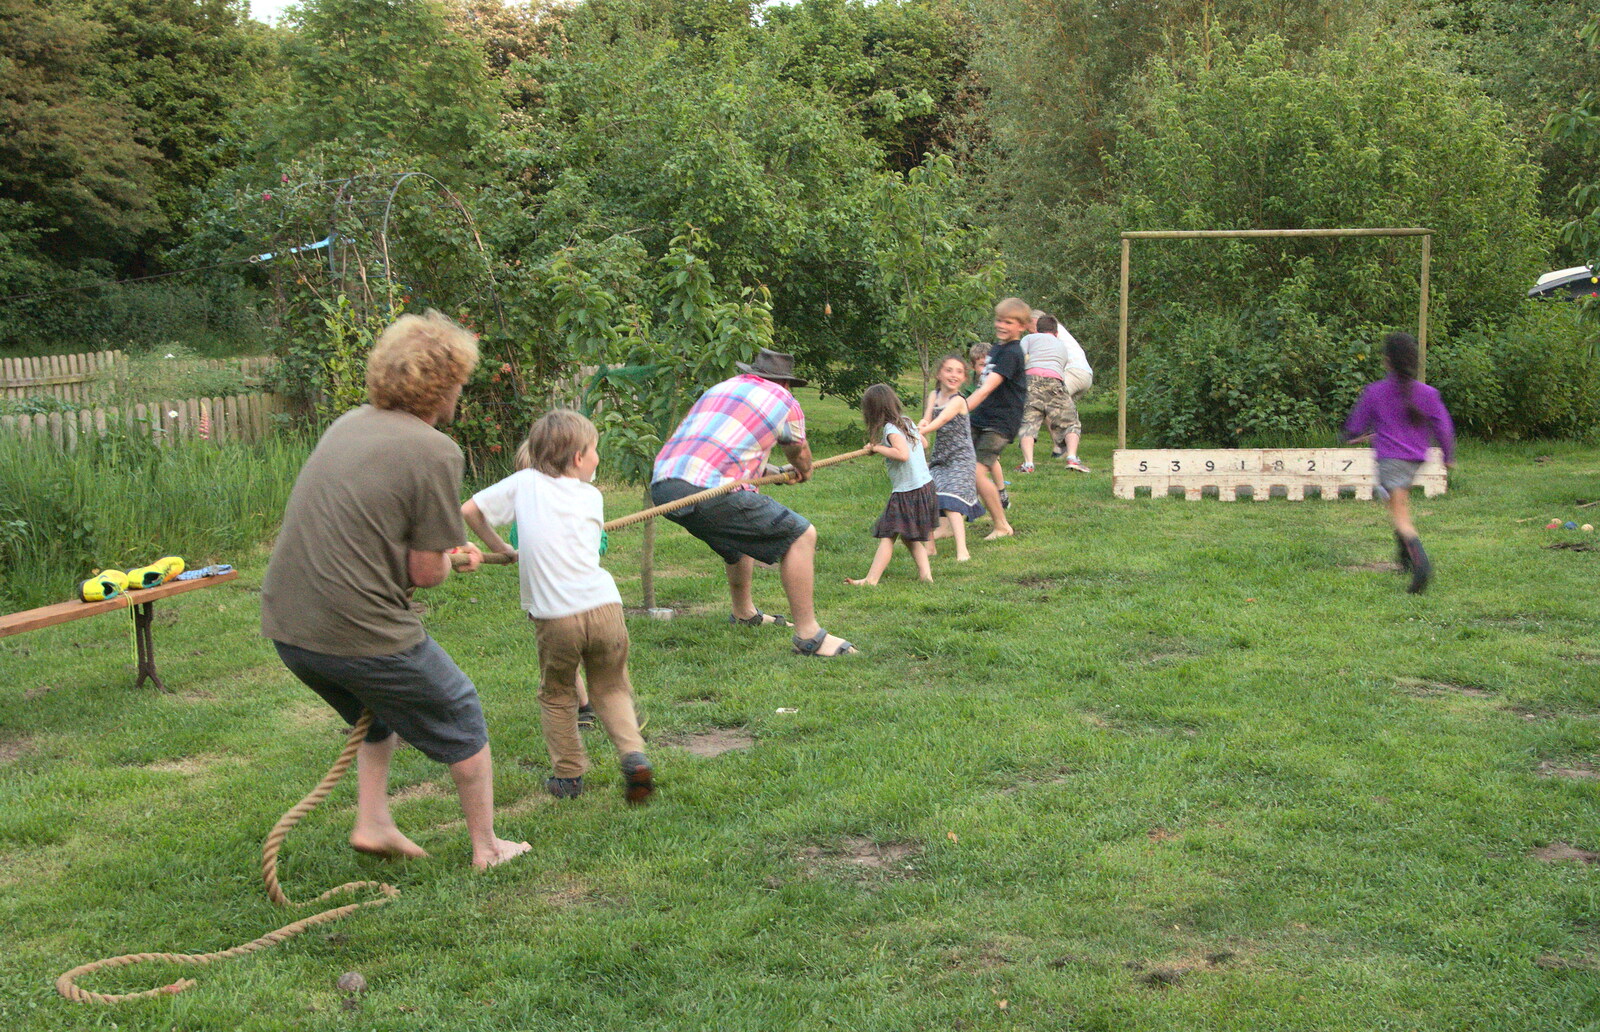 There's a tug of war from Wavy and Martina's Combined Birthdays, Thrandeston, Suffolk - 27th May 2017